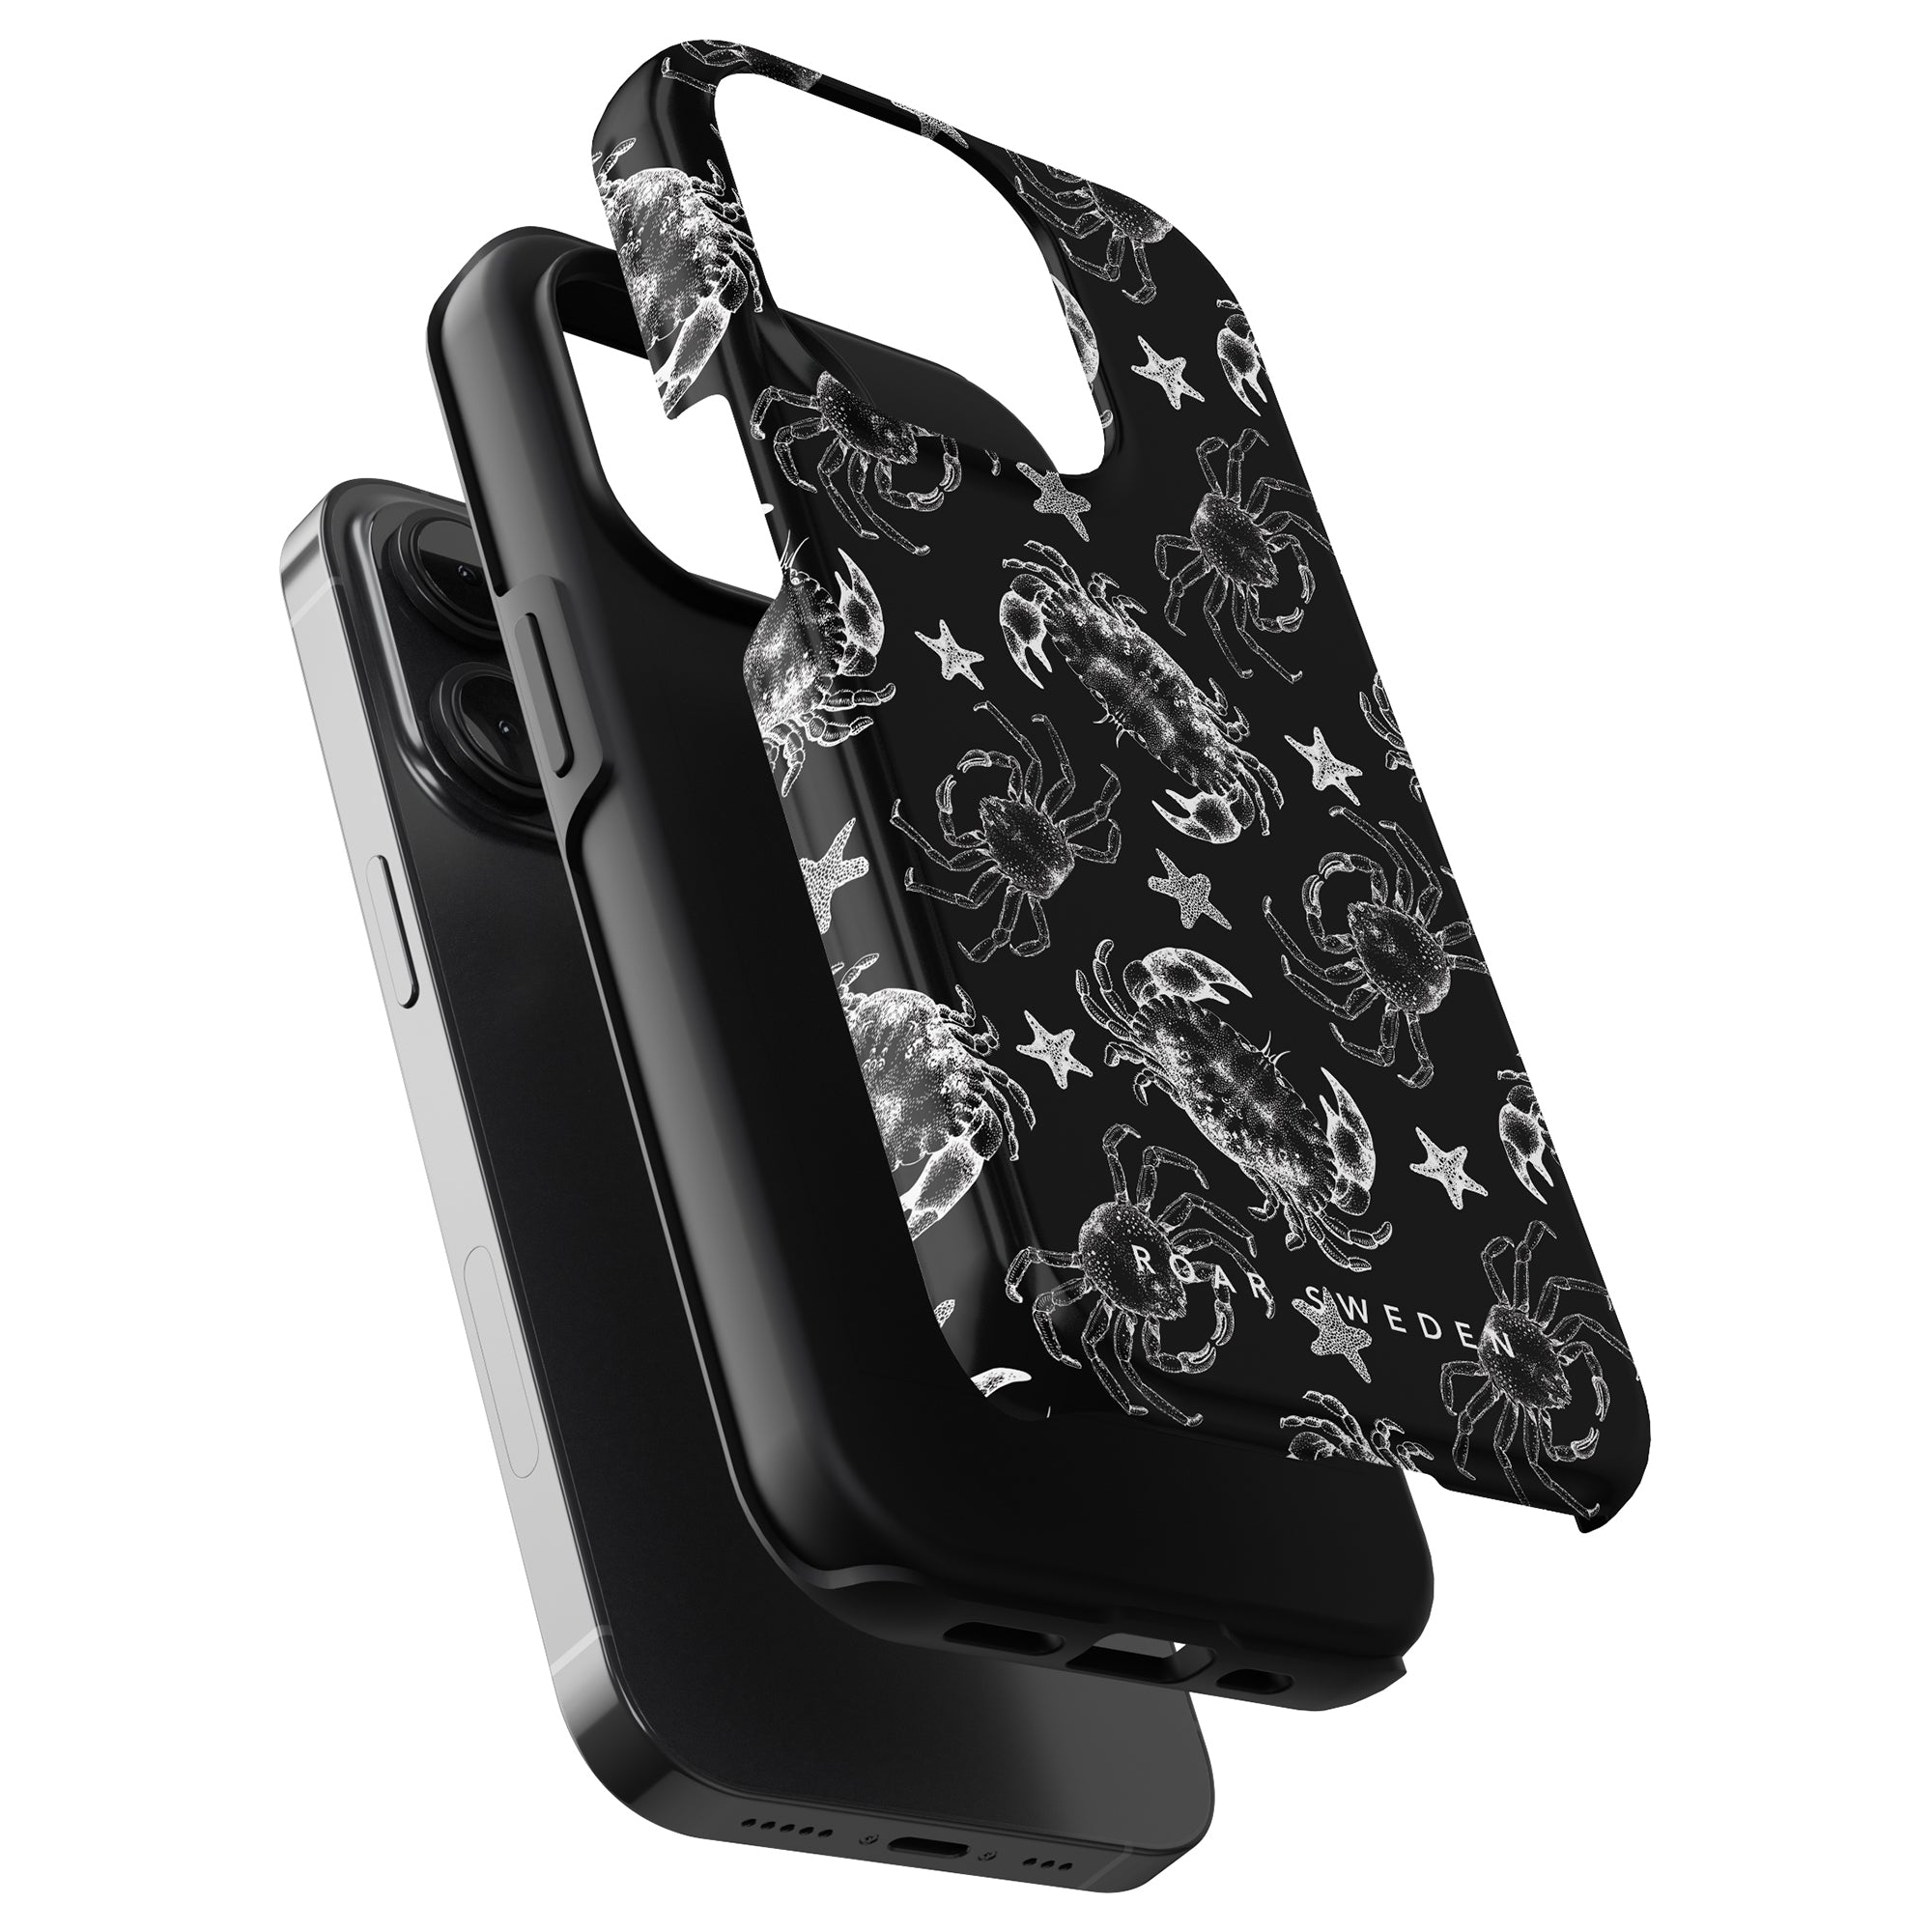 Three phone cases are shown in black and white, one of which is a Black Crab - Tough Case featuring skulls and stars from the Ocean Collection.